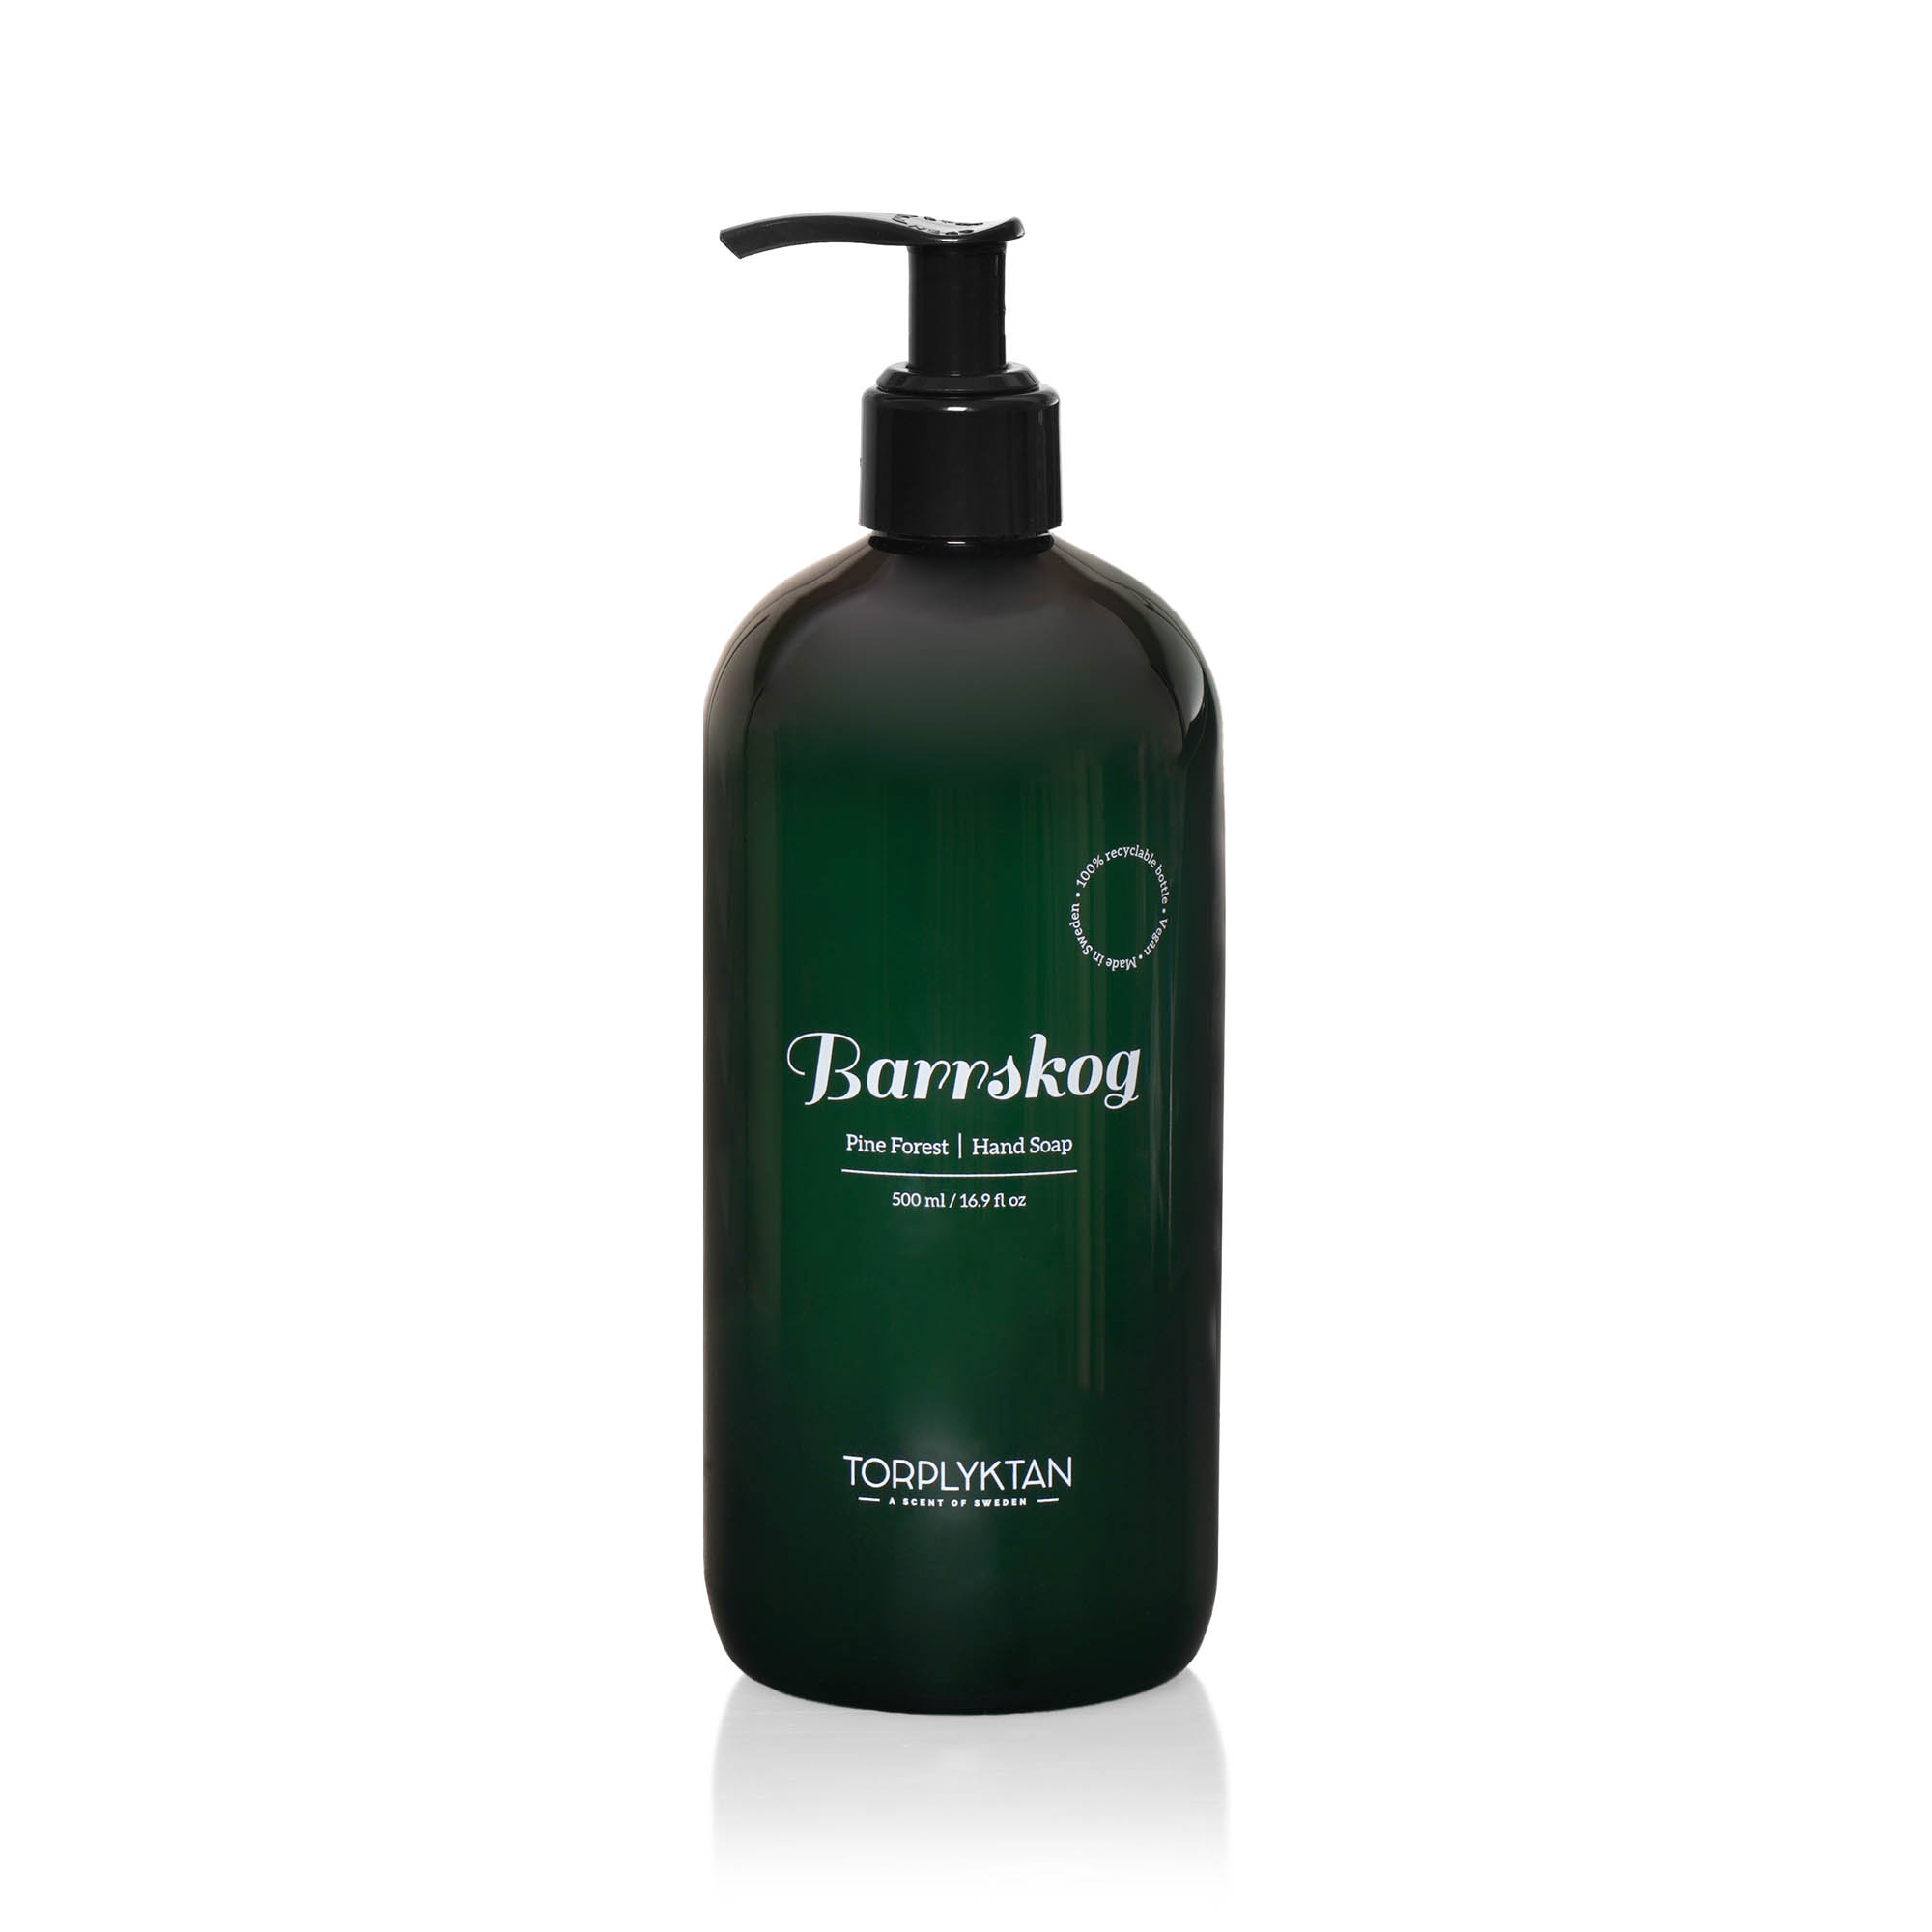 Hand soap &amp; bodywash with the scent of Pine Forest